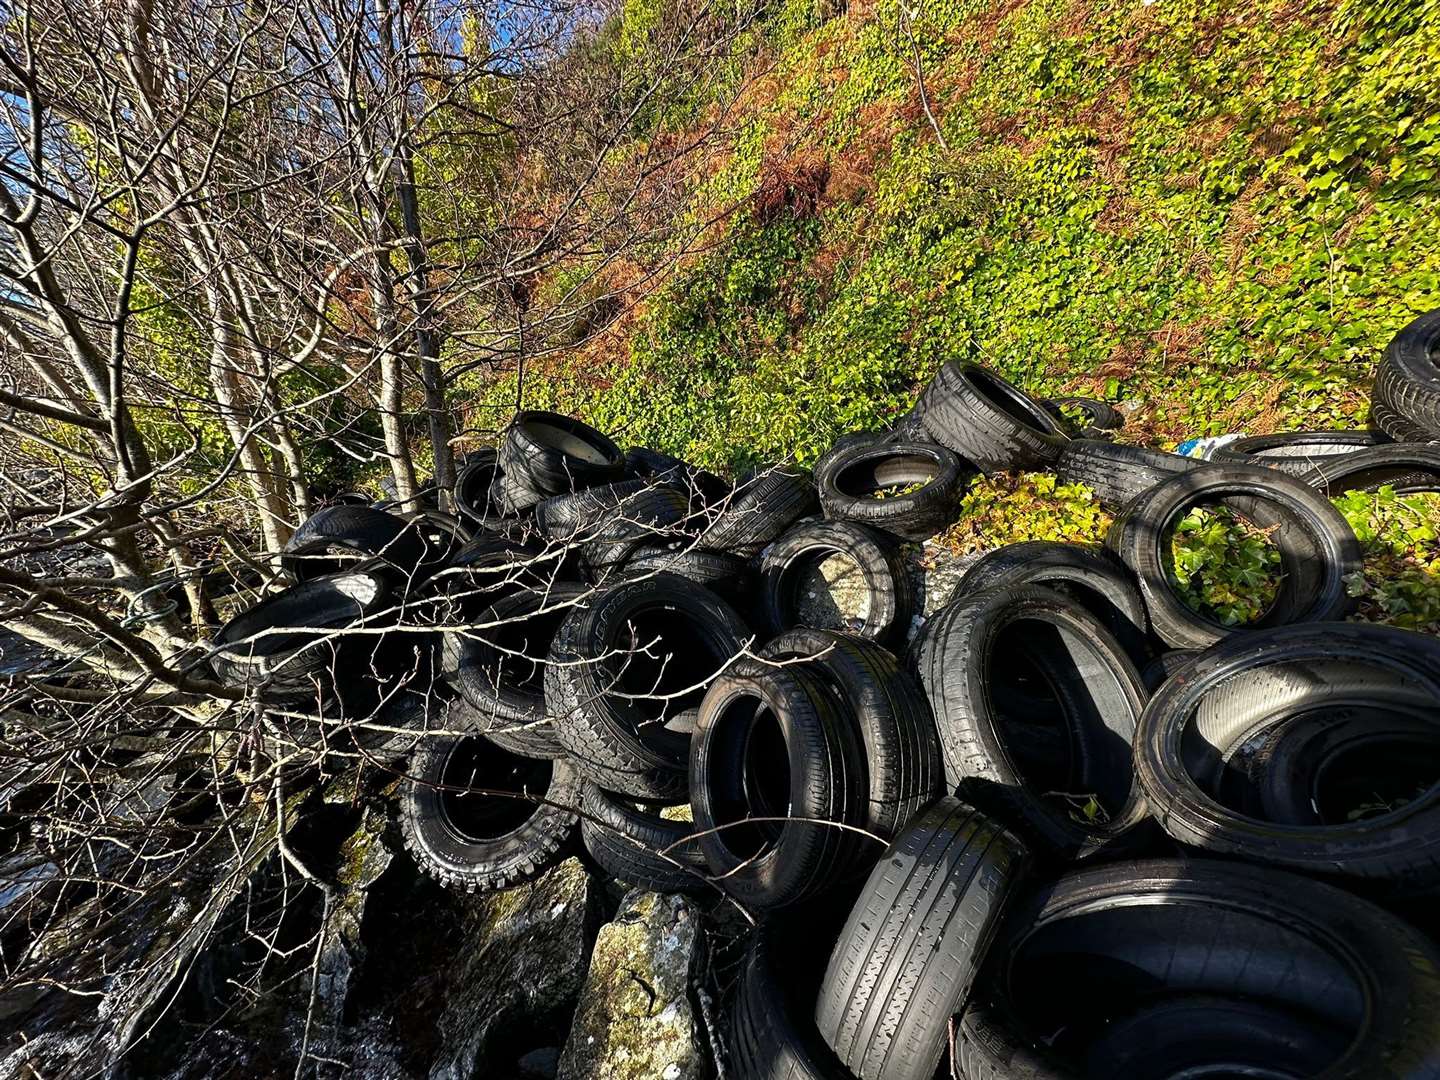 Some tyres were dumped halfway up the banks.